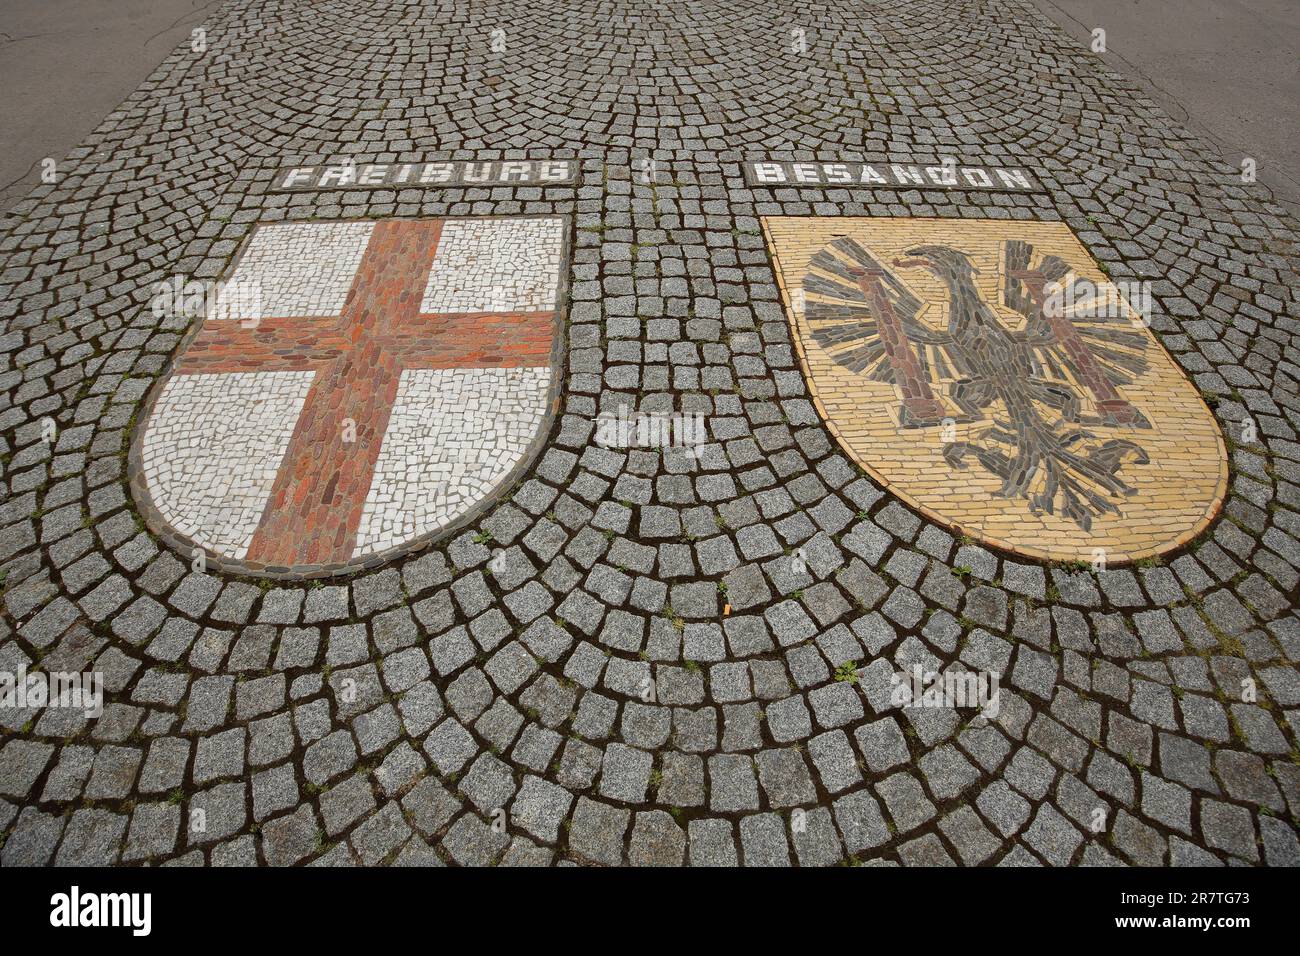 City coat of arms with floor mosaic from the twin city of Freiburg im Breisgau, Hotel de Ville, City Hall, Mosaic, Besancon, Doubs, France Stock Photo